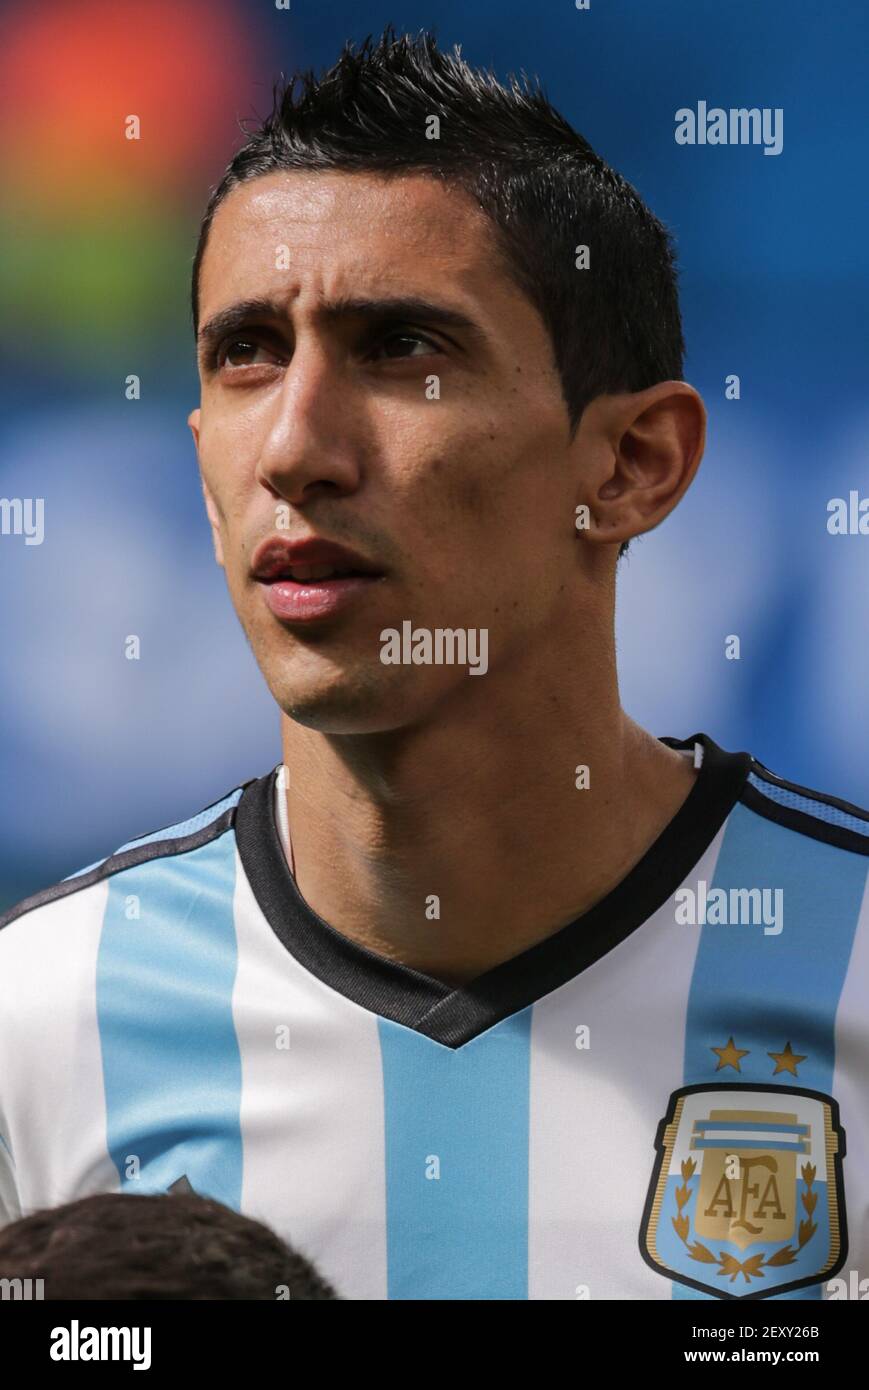 Argentina's Angel DI MARIA during the 2014 FIFA World Cup Quarter-final,  soccer match between Argentina and Belgium, in National Stadium in  Brasilia, Brazil, on July 5, 2014. Photo by Andre Chaco/Fotoarena/Sipa USA